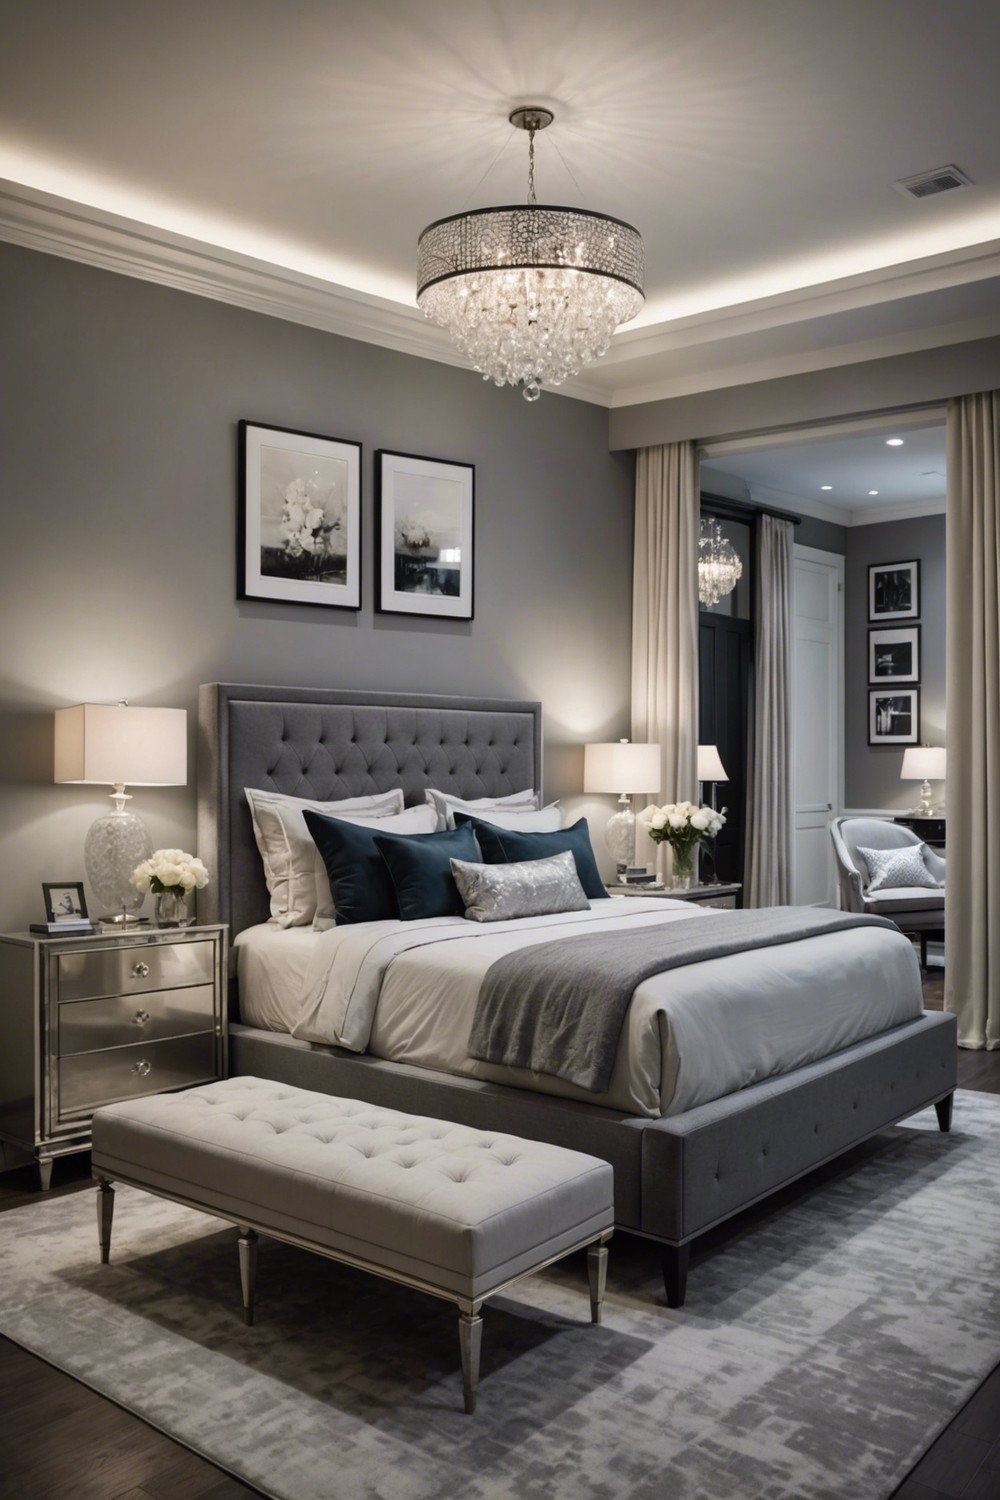 Neutral Haven: Soft Gray Walls and Creamy Accents